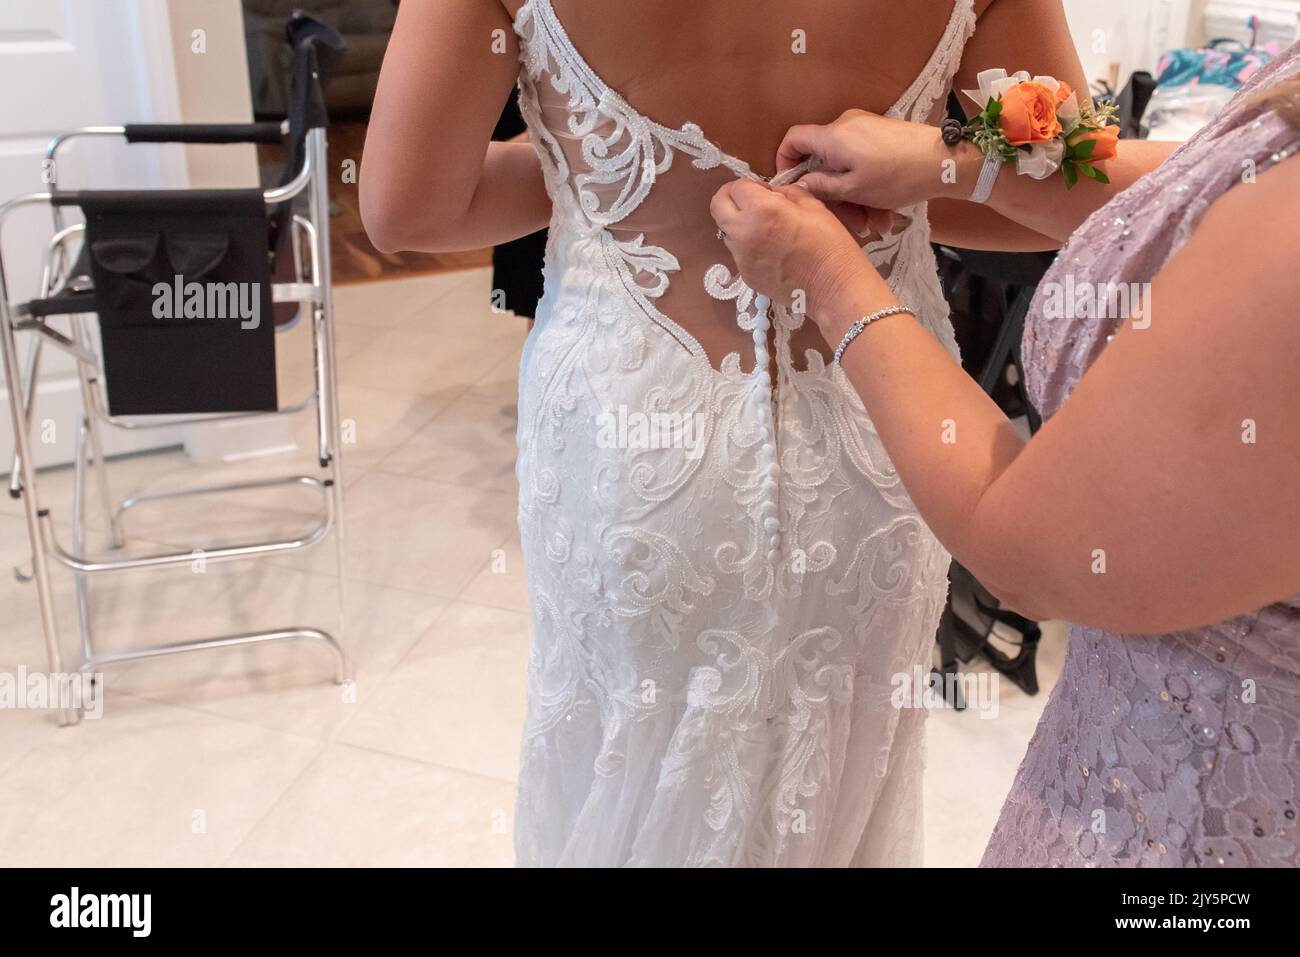 Bride receiving help buttoning the top buttons on her white laced wedding dress before the ceremony. Stock Photo